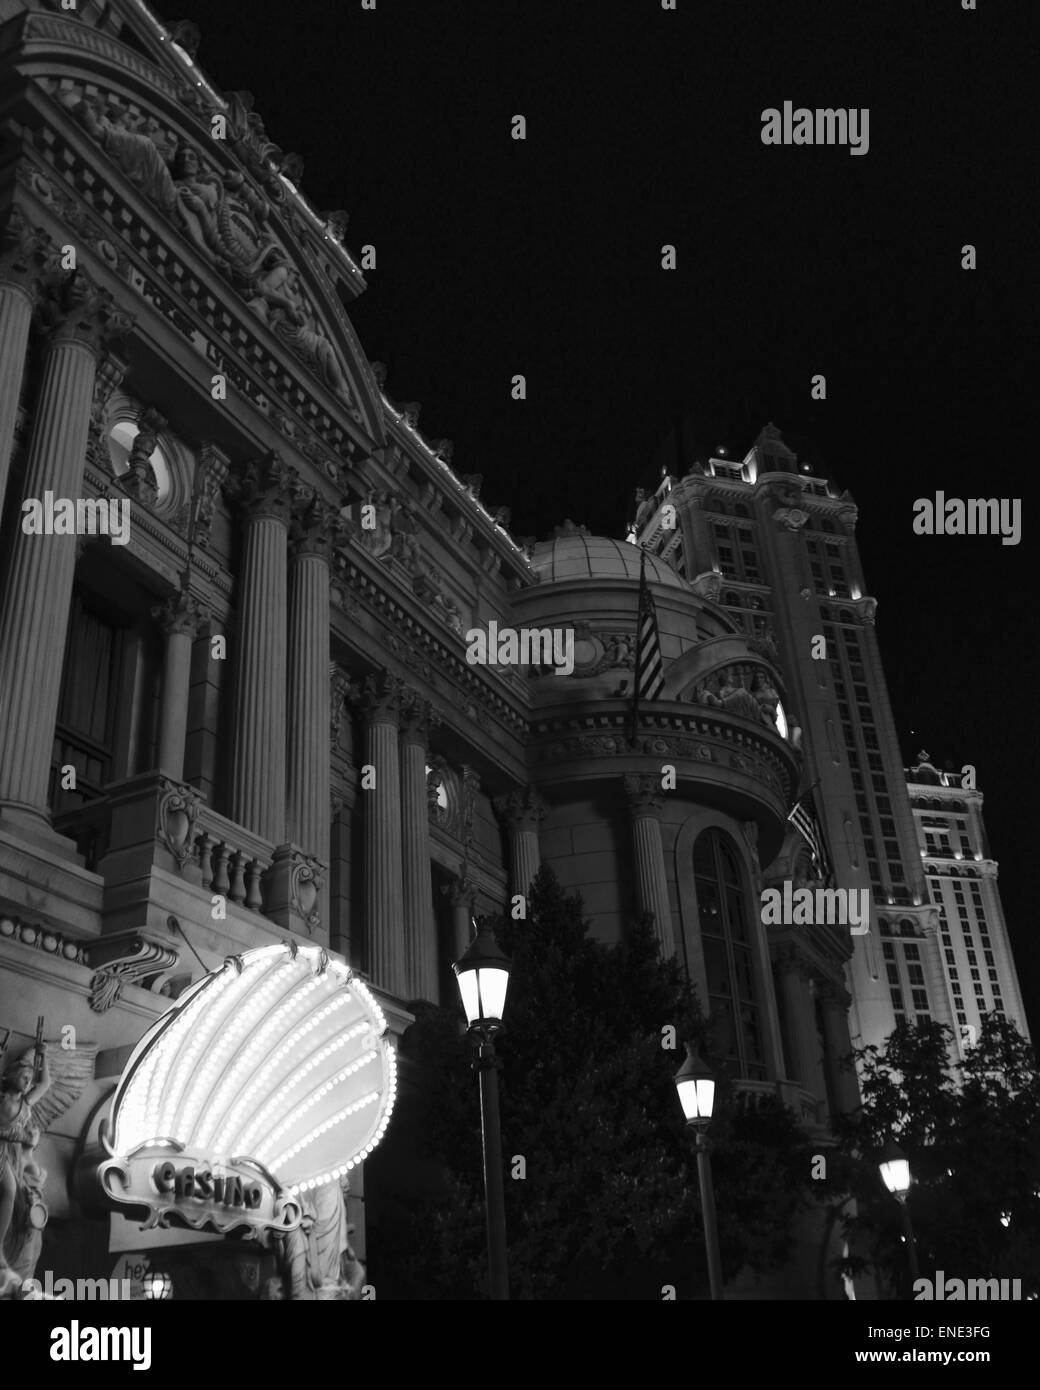 One of the casino entrances at the Paris Las Vegas Hotel and Casino Stock Photo